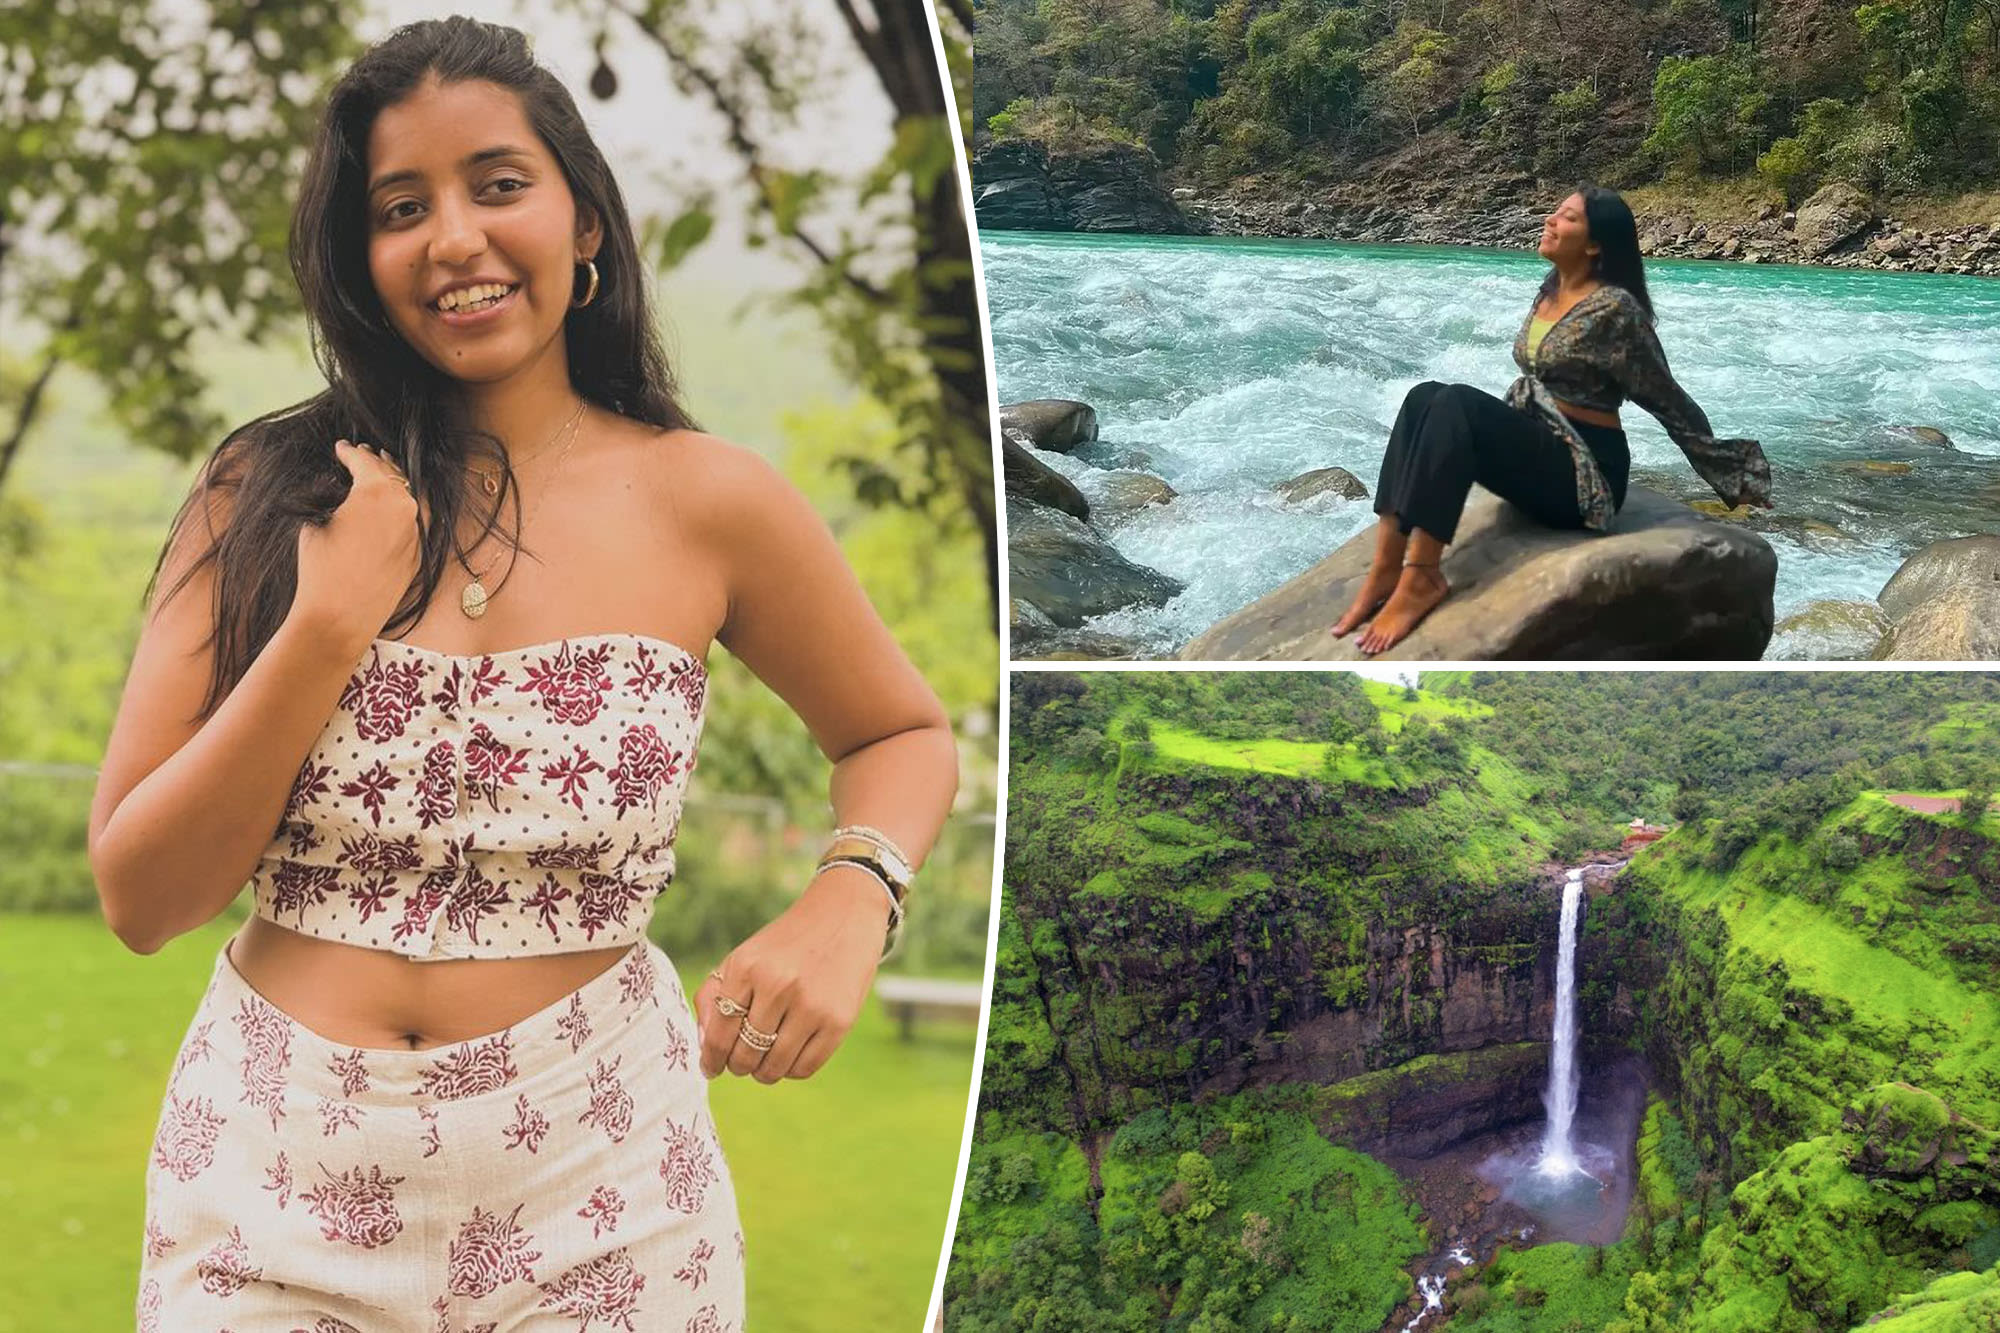 Travel influencer falls 350 feet to death while filming at waterfall